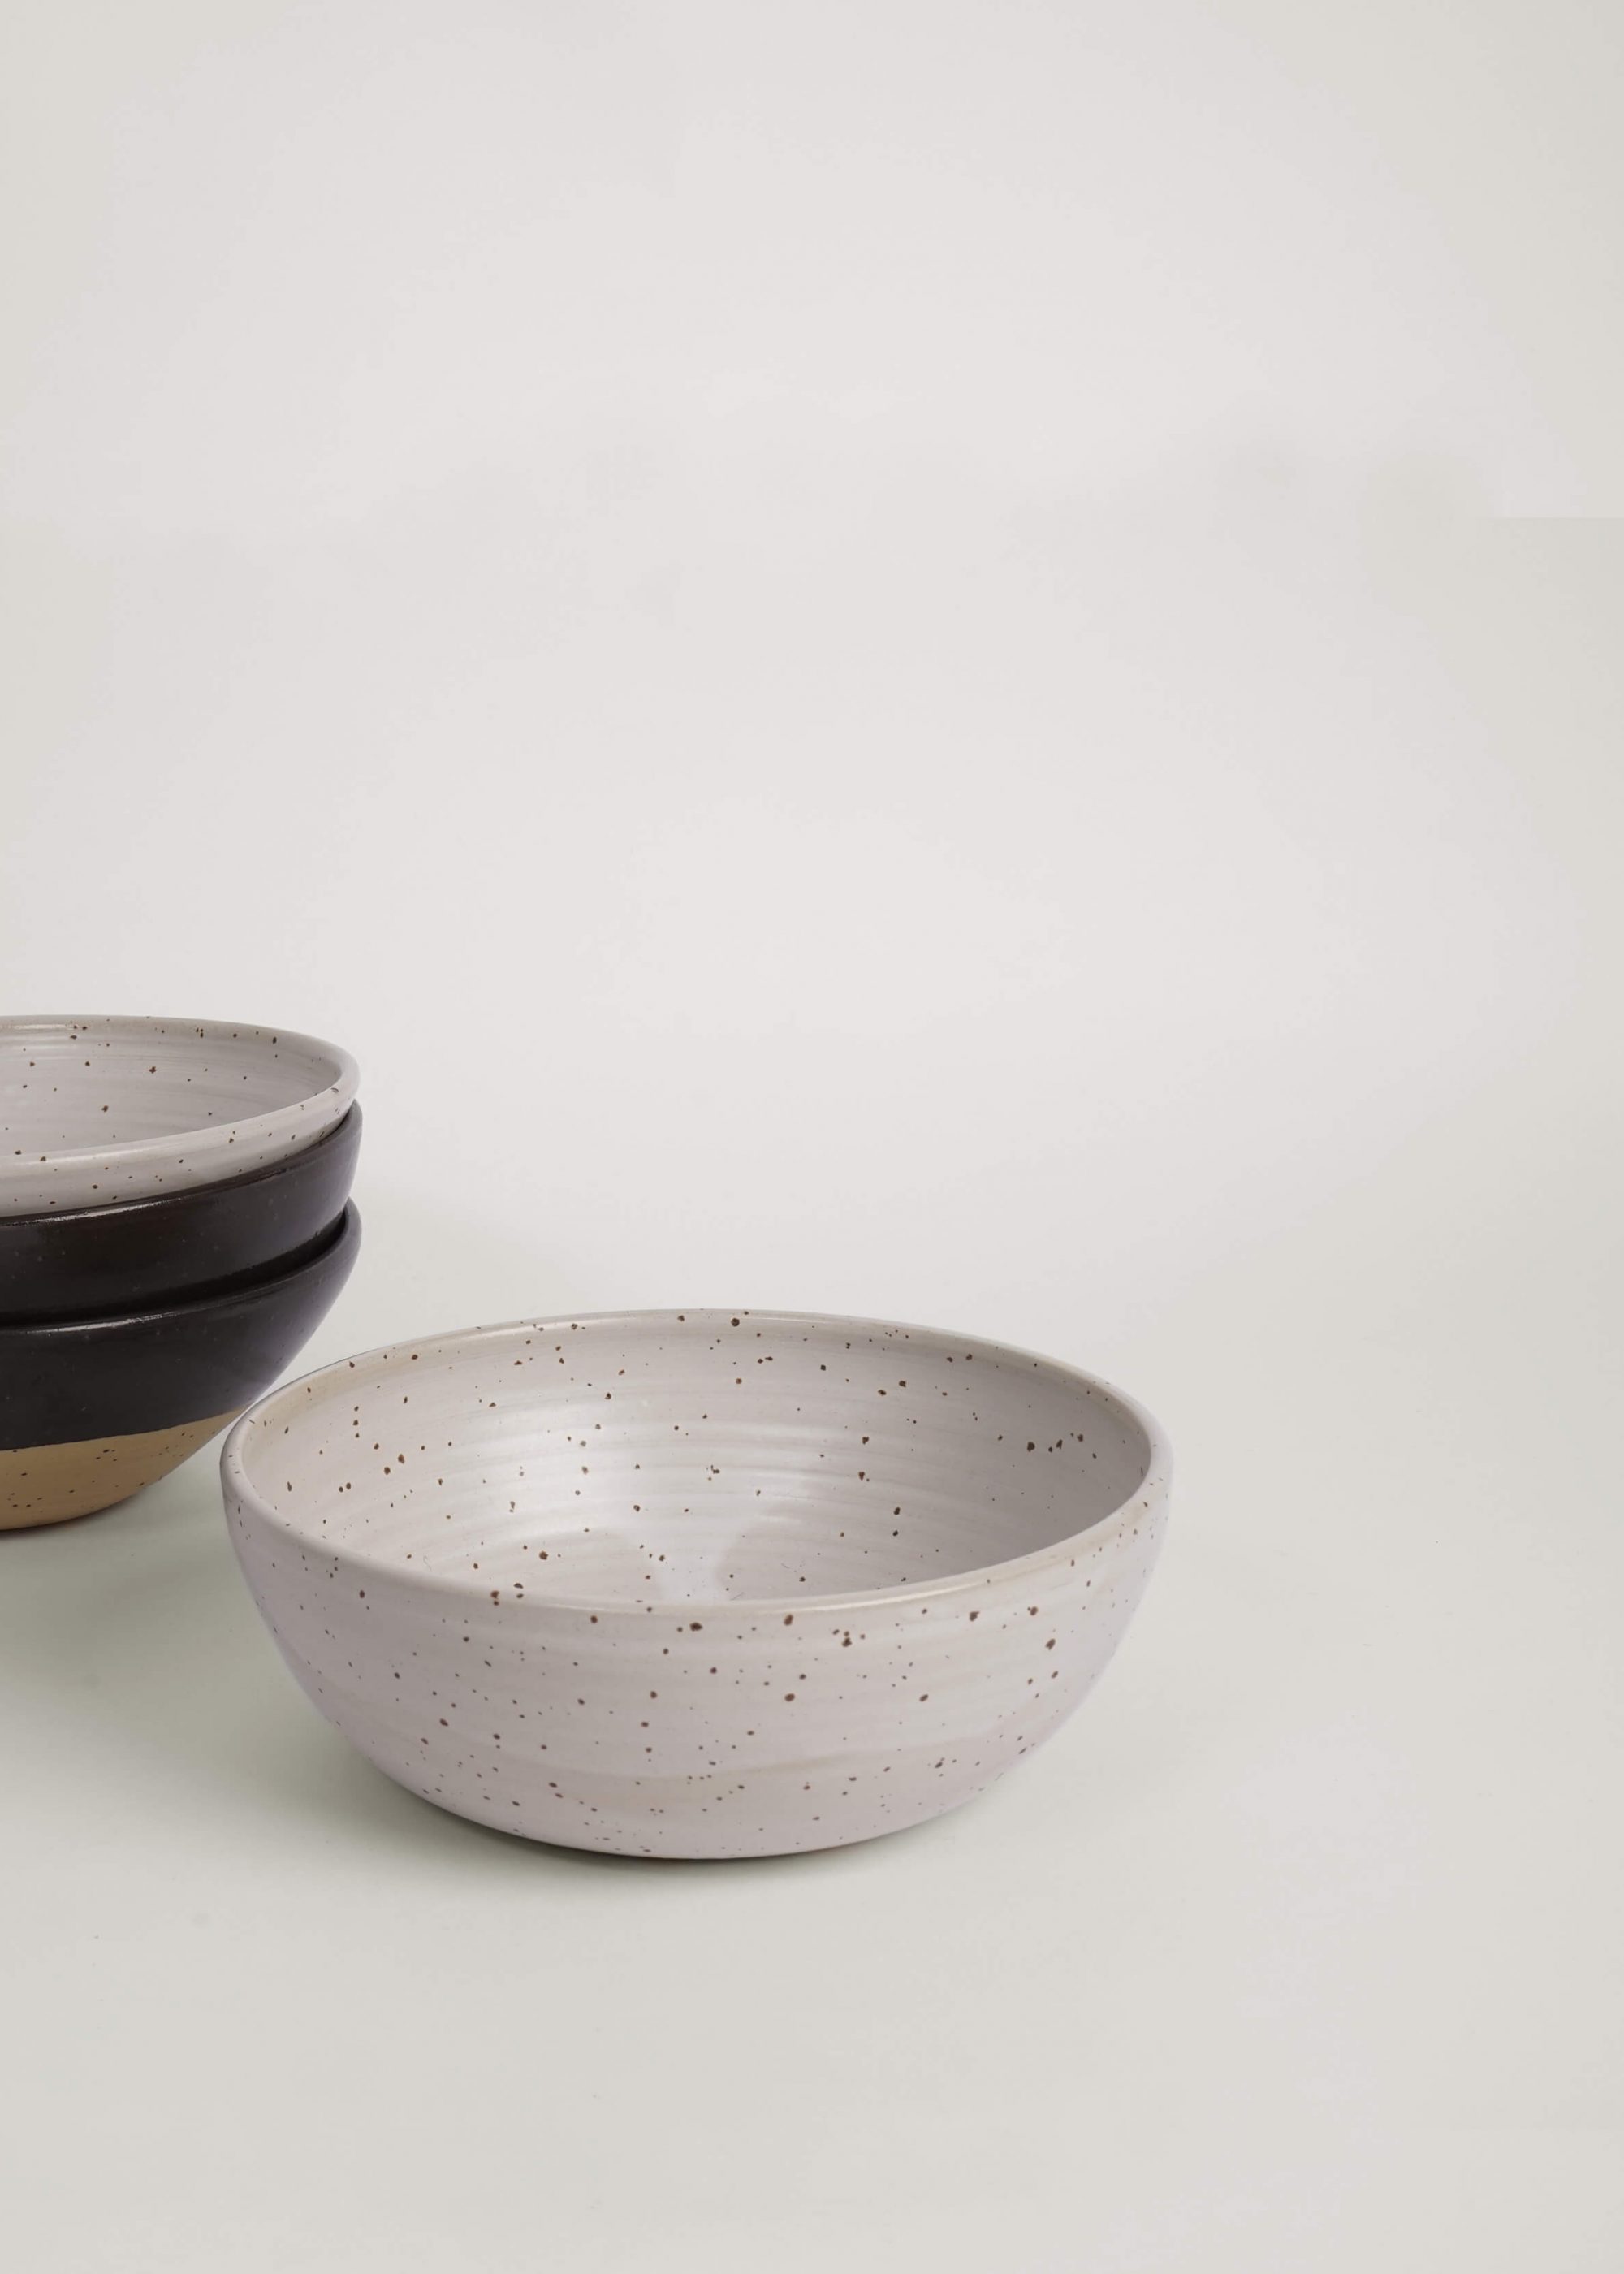 Product image for »Wildenhain« White Speckled Stoneware Bowl